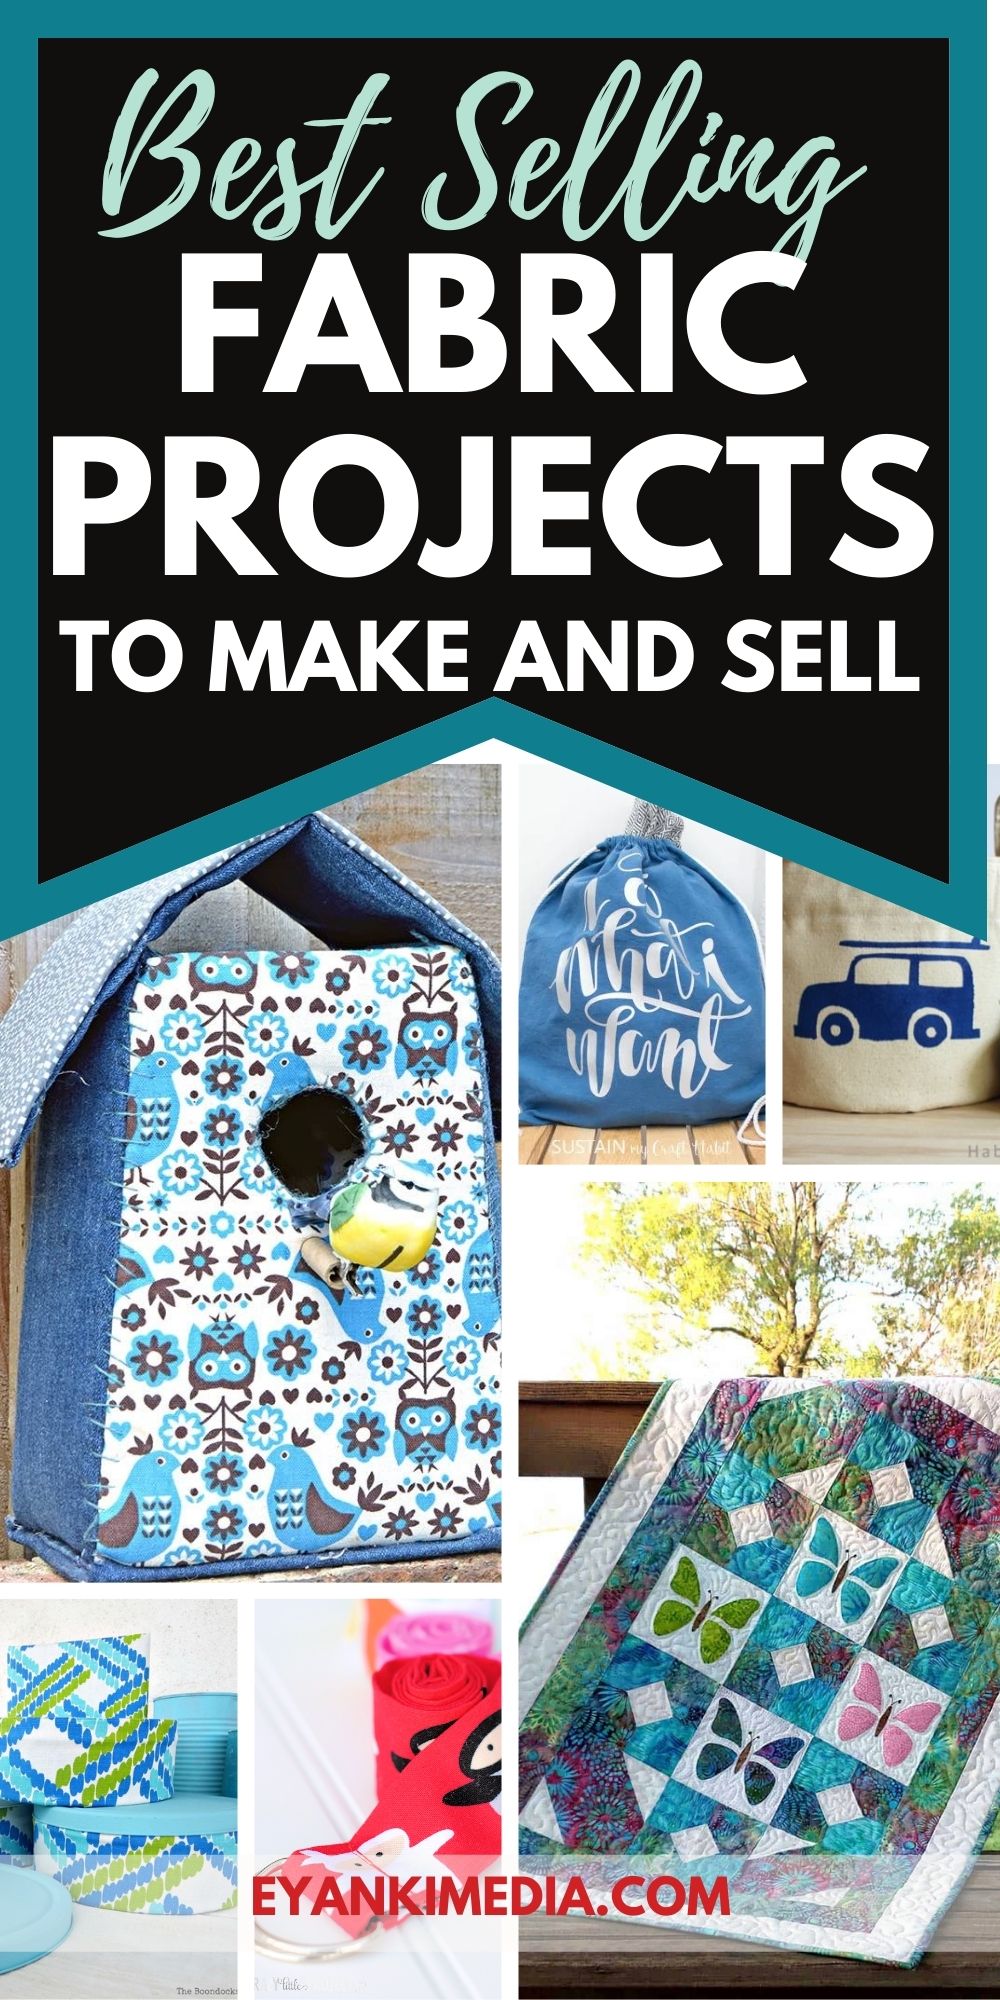 Fabric craft ideas to make and sell